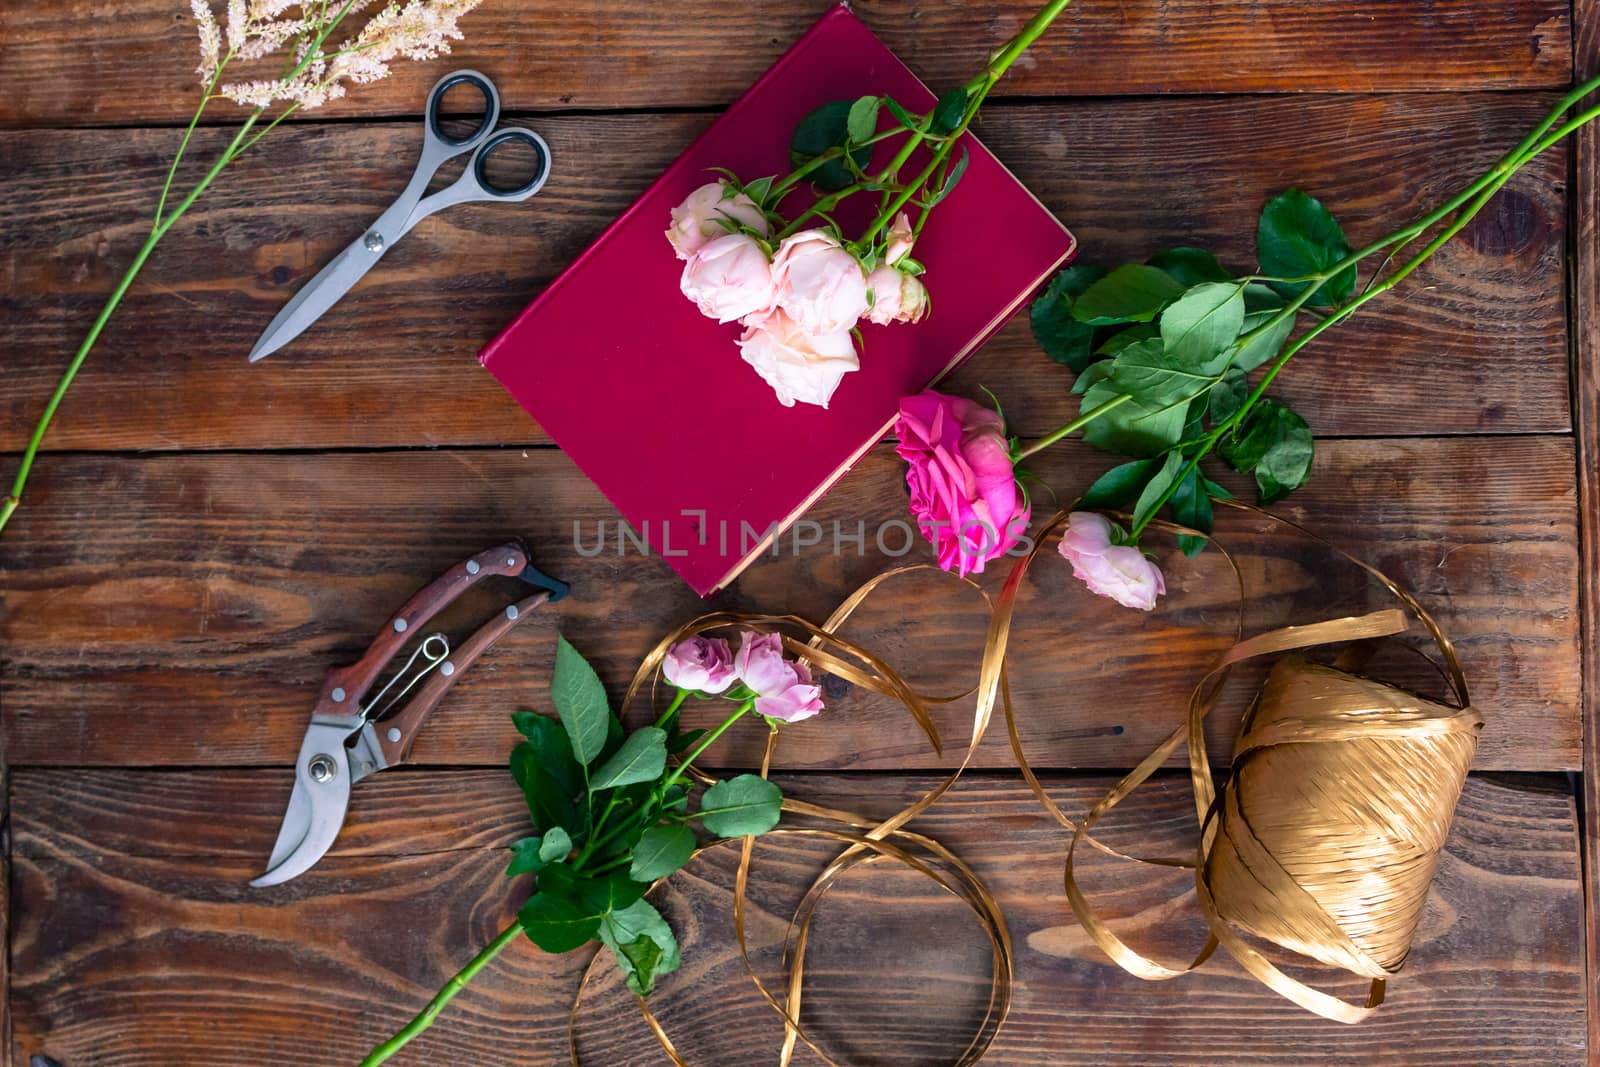 On the wooden surface laid out tools for flower bouquets: scissors, roses, colored ribbon, roses.